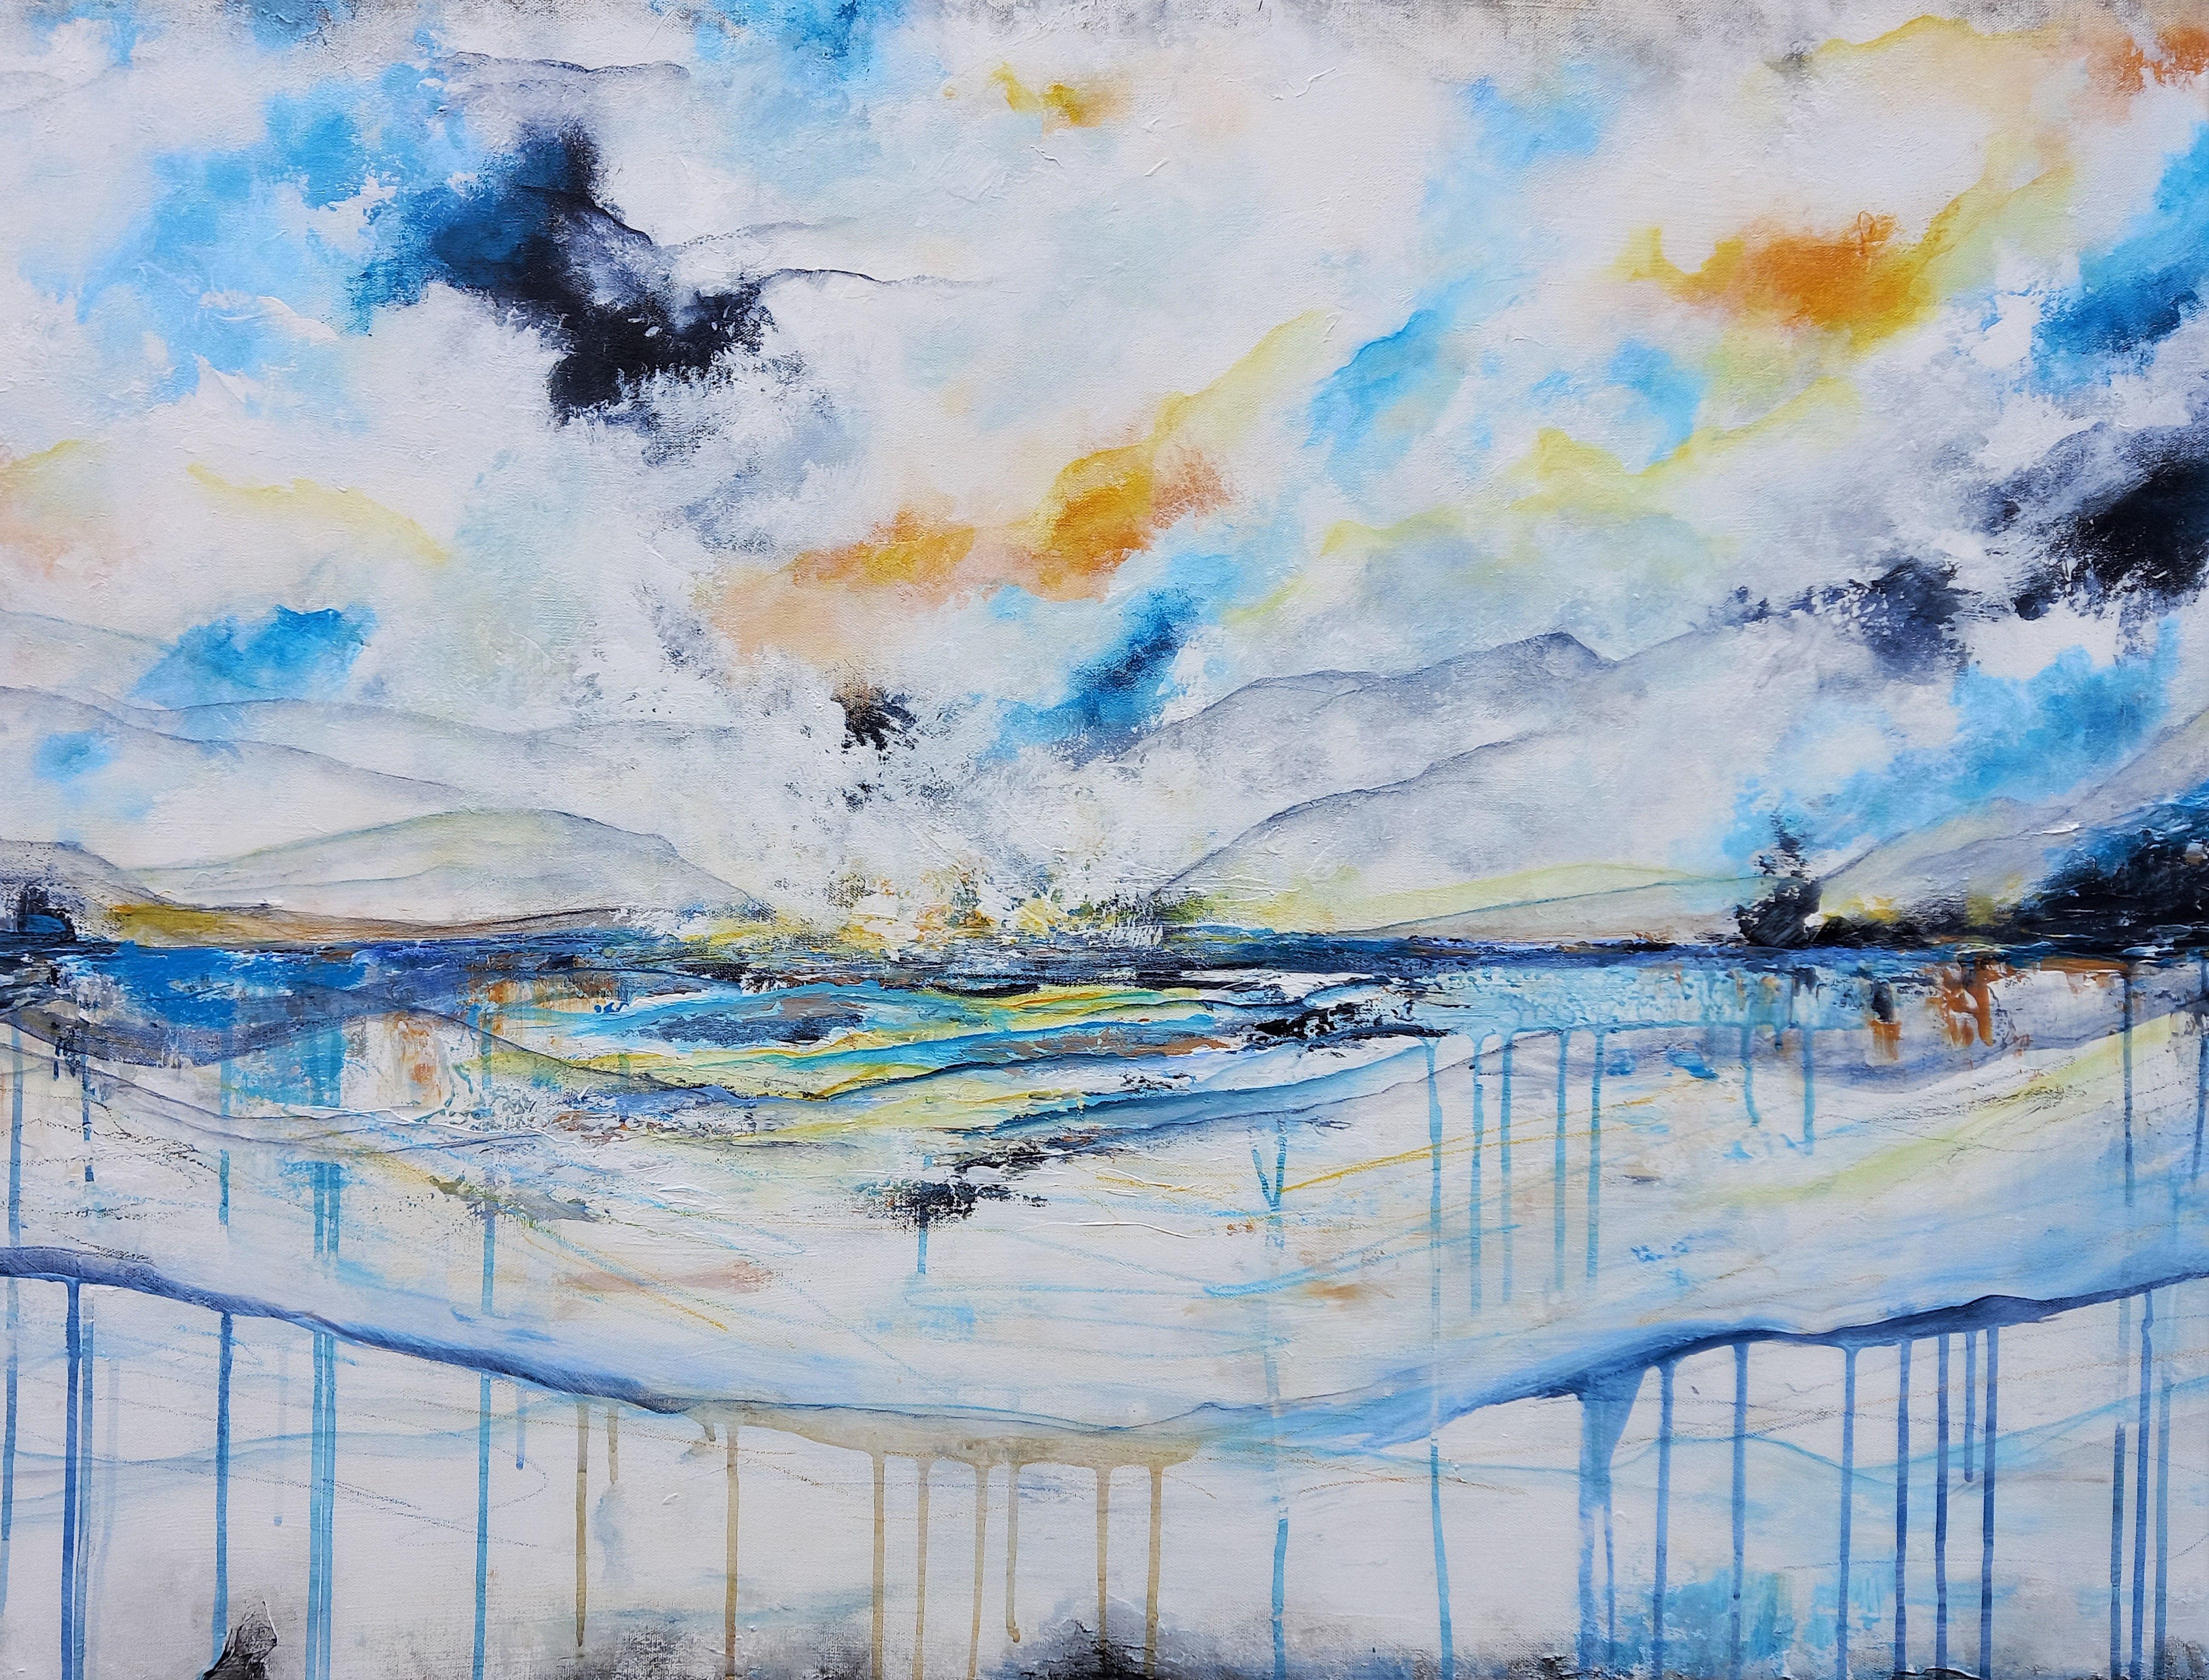 XXXL Reflections of the Hills 120 x 80 cm    Created with many layers using acrylic, Oil and oil pastels, with a contemporary colour palette a juxtaposition of soft and delicate with accents of thick texture and bold colour.    The early morning fog